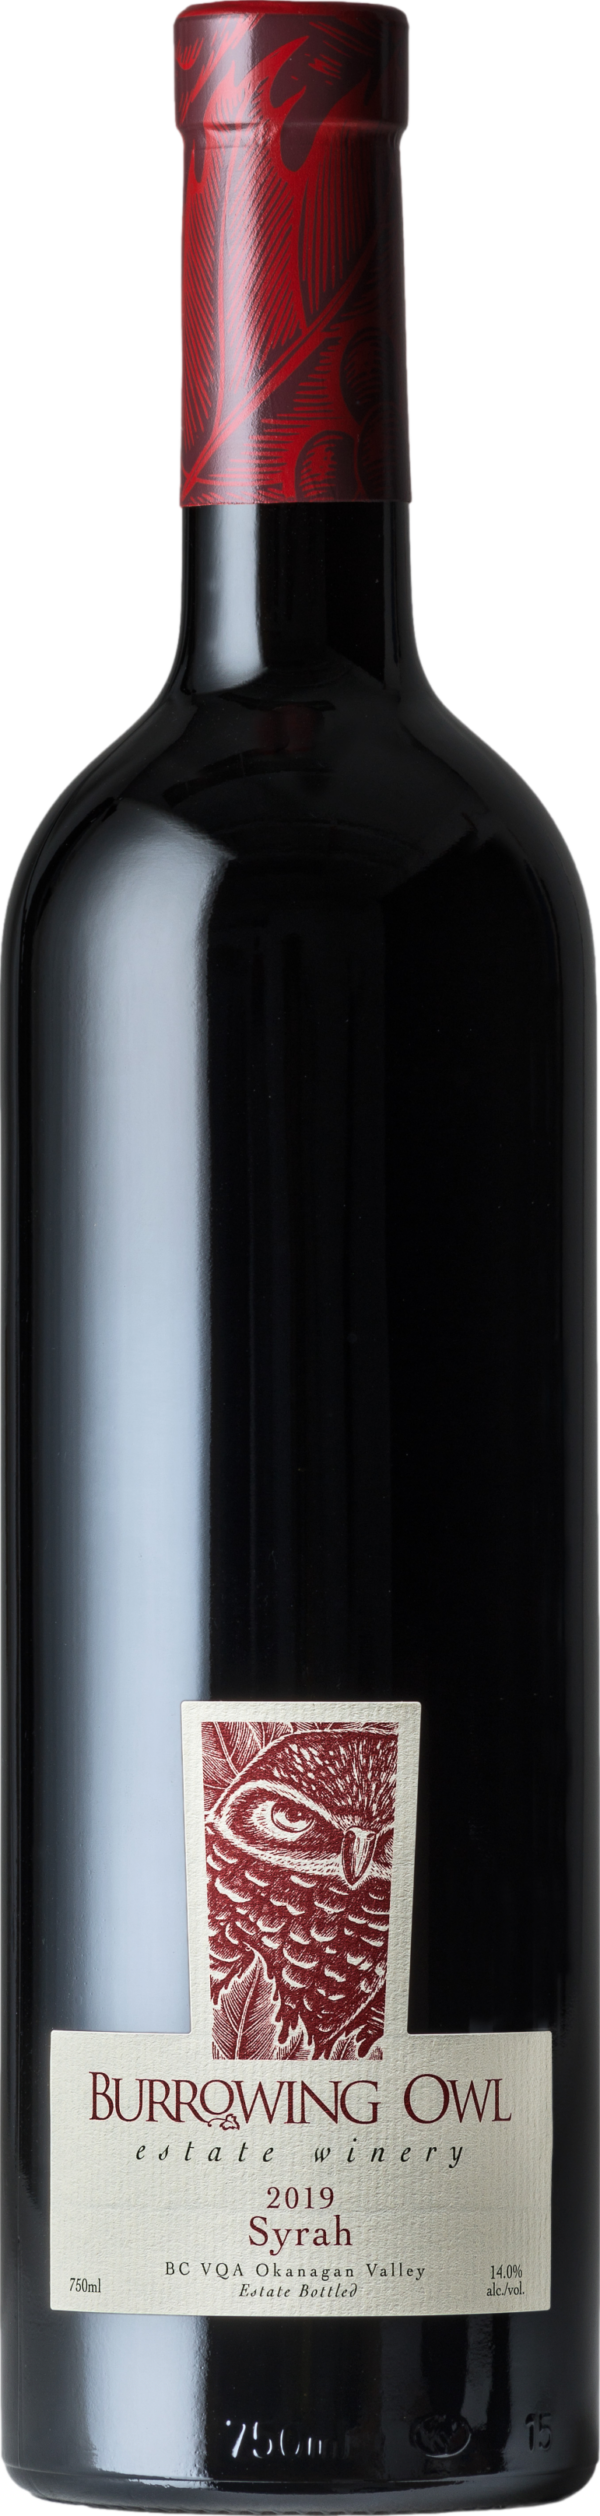 Product image of Burrowing Owl Syrah 2019 from 8wines